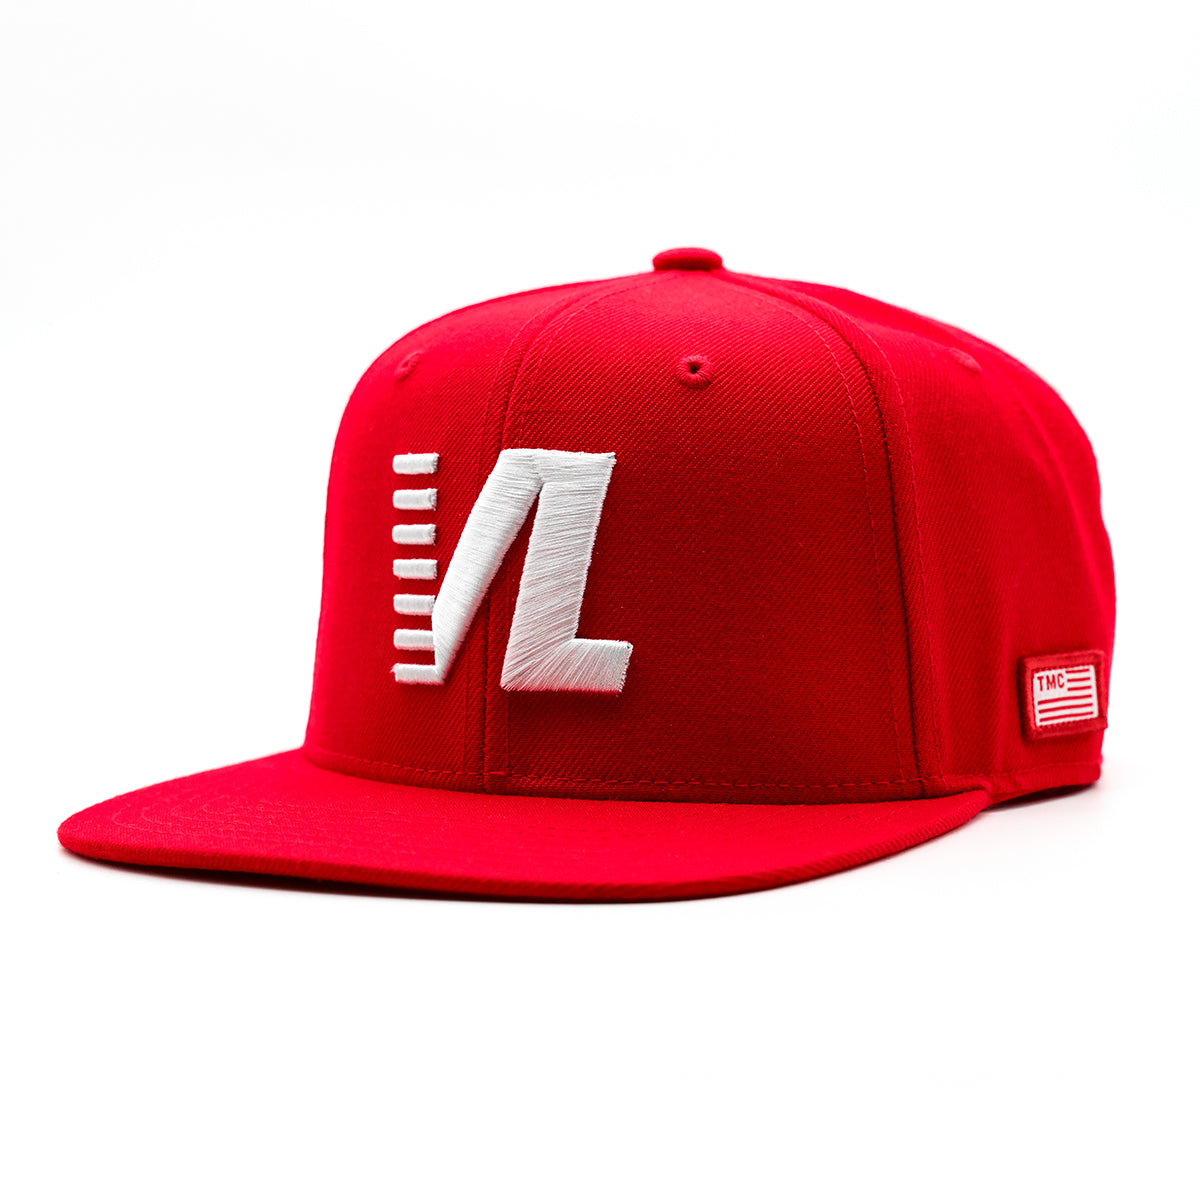 Victory Lap Limited Edition Snapback - Red/White - Angle